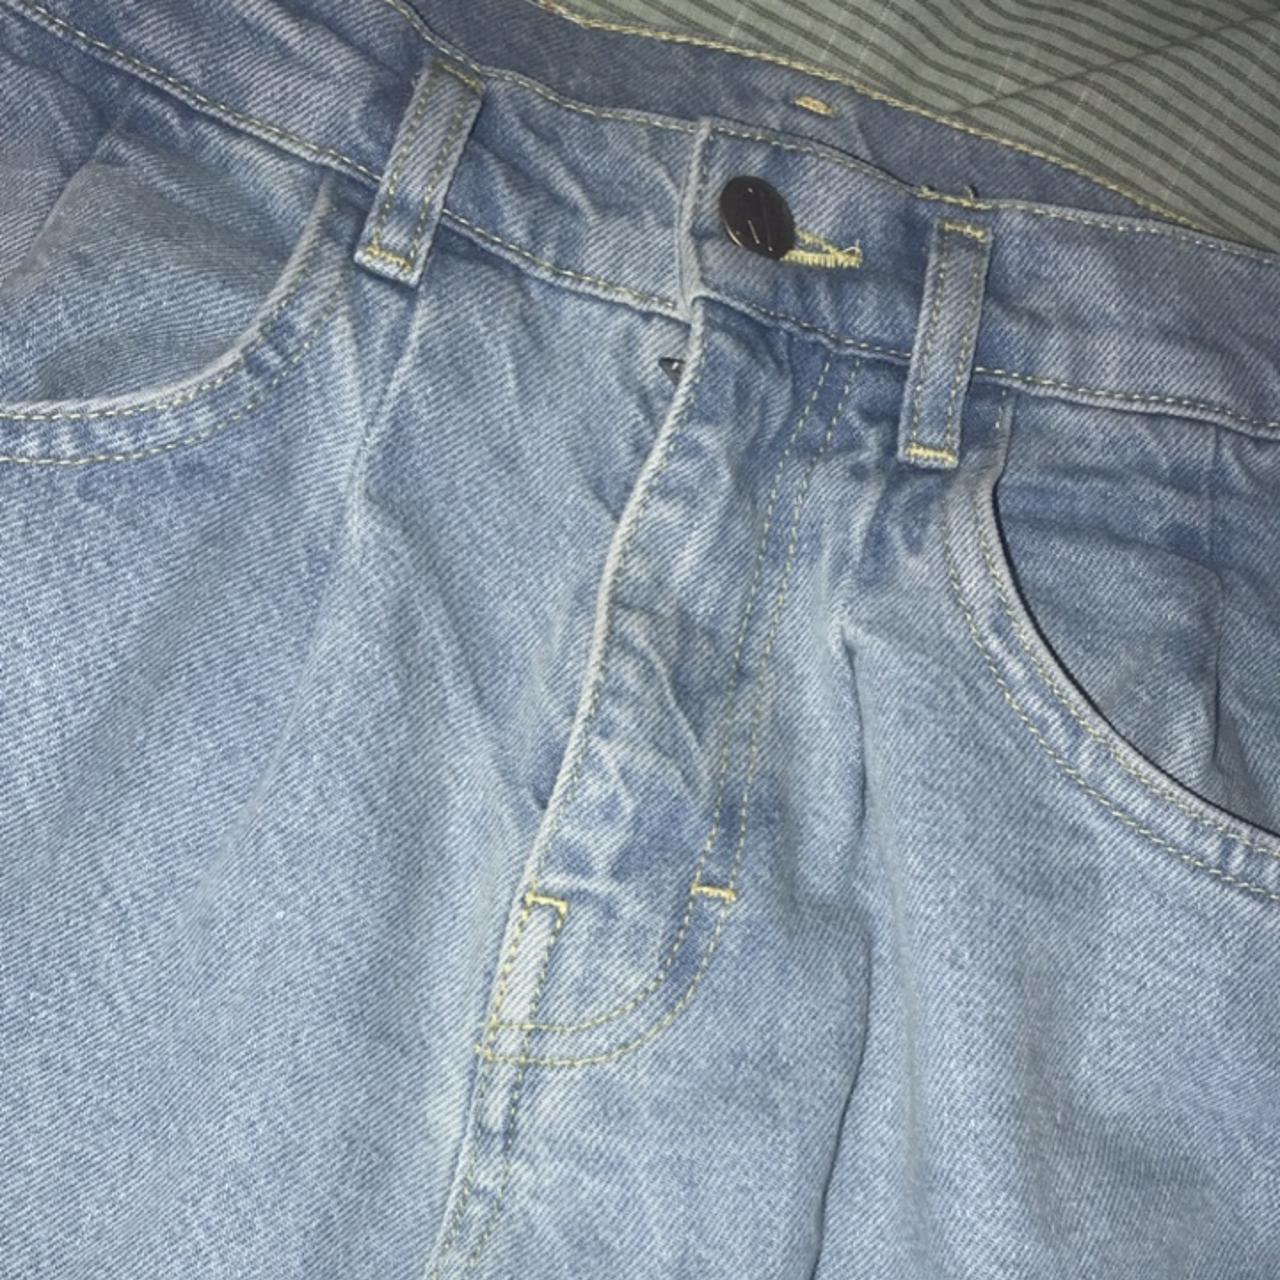 Reclaimed Vintage Inspired The '83 unisex relaxed jeans in light wash blue